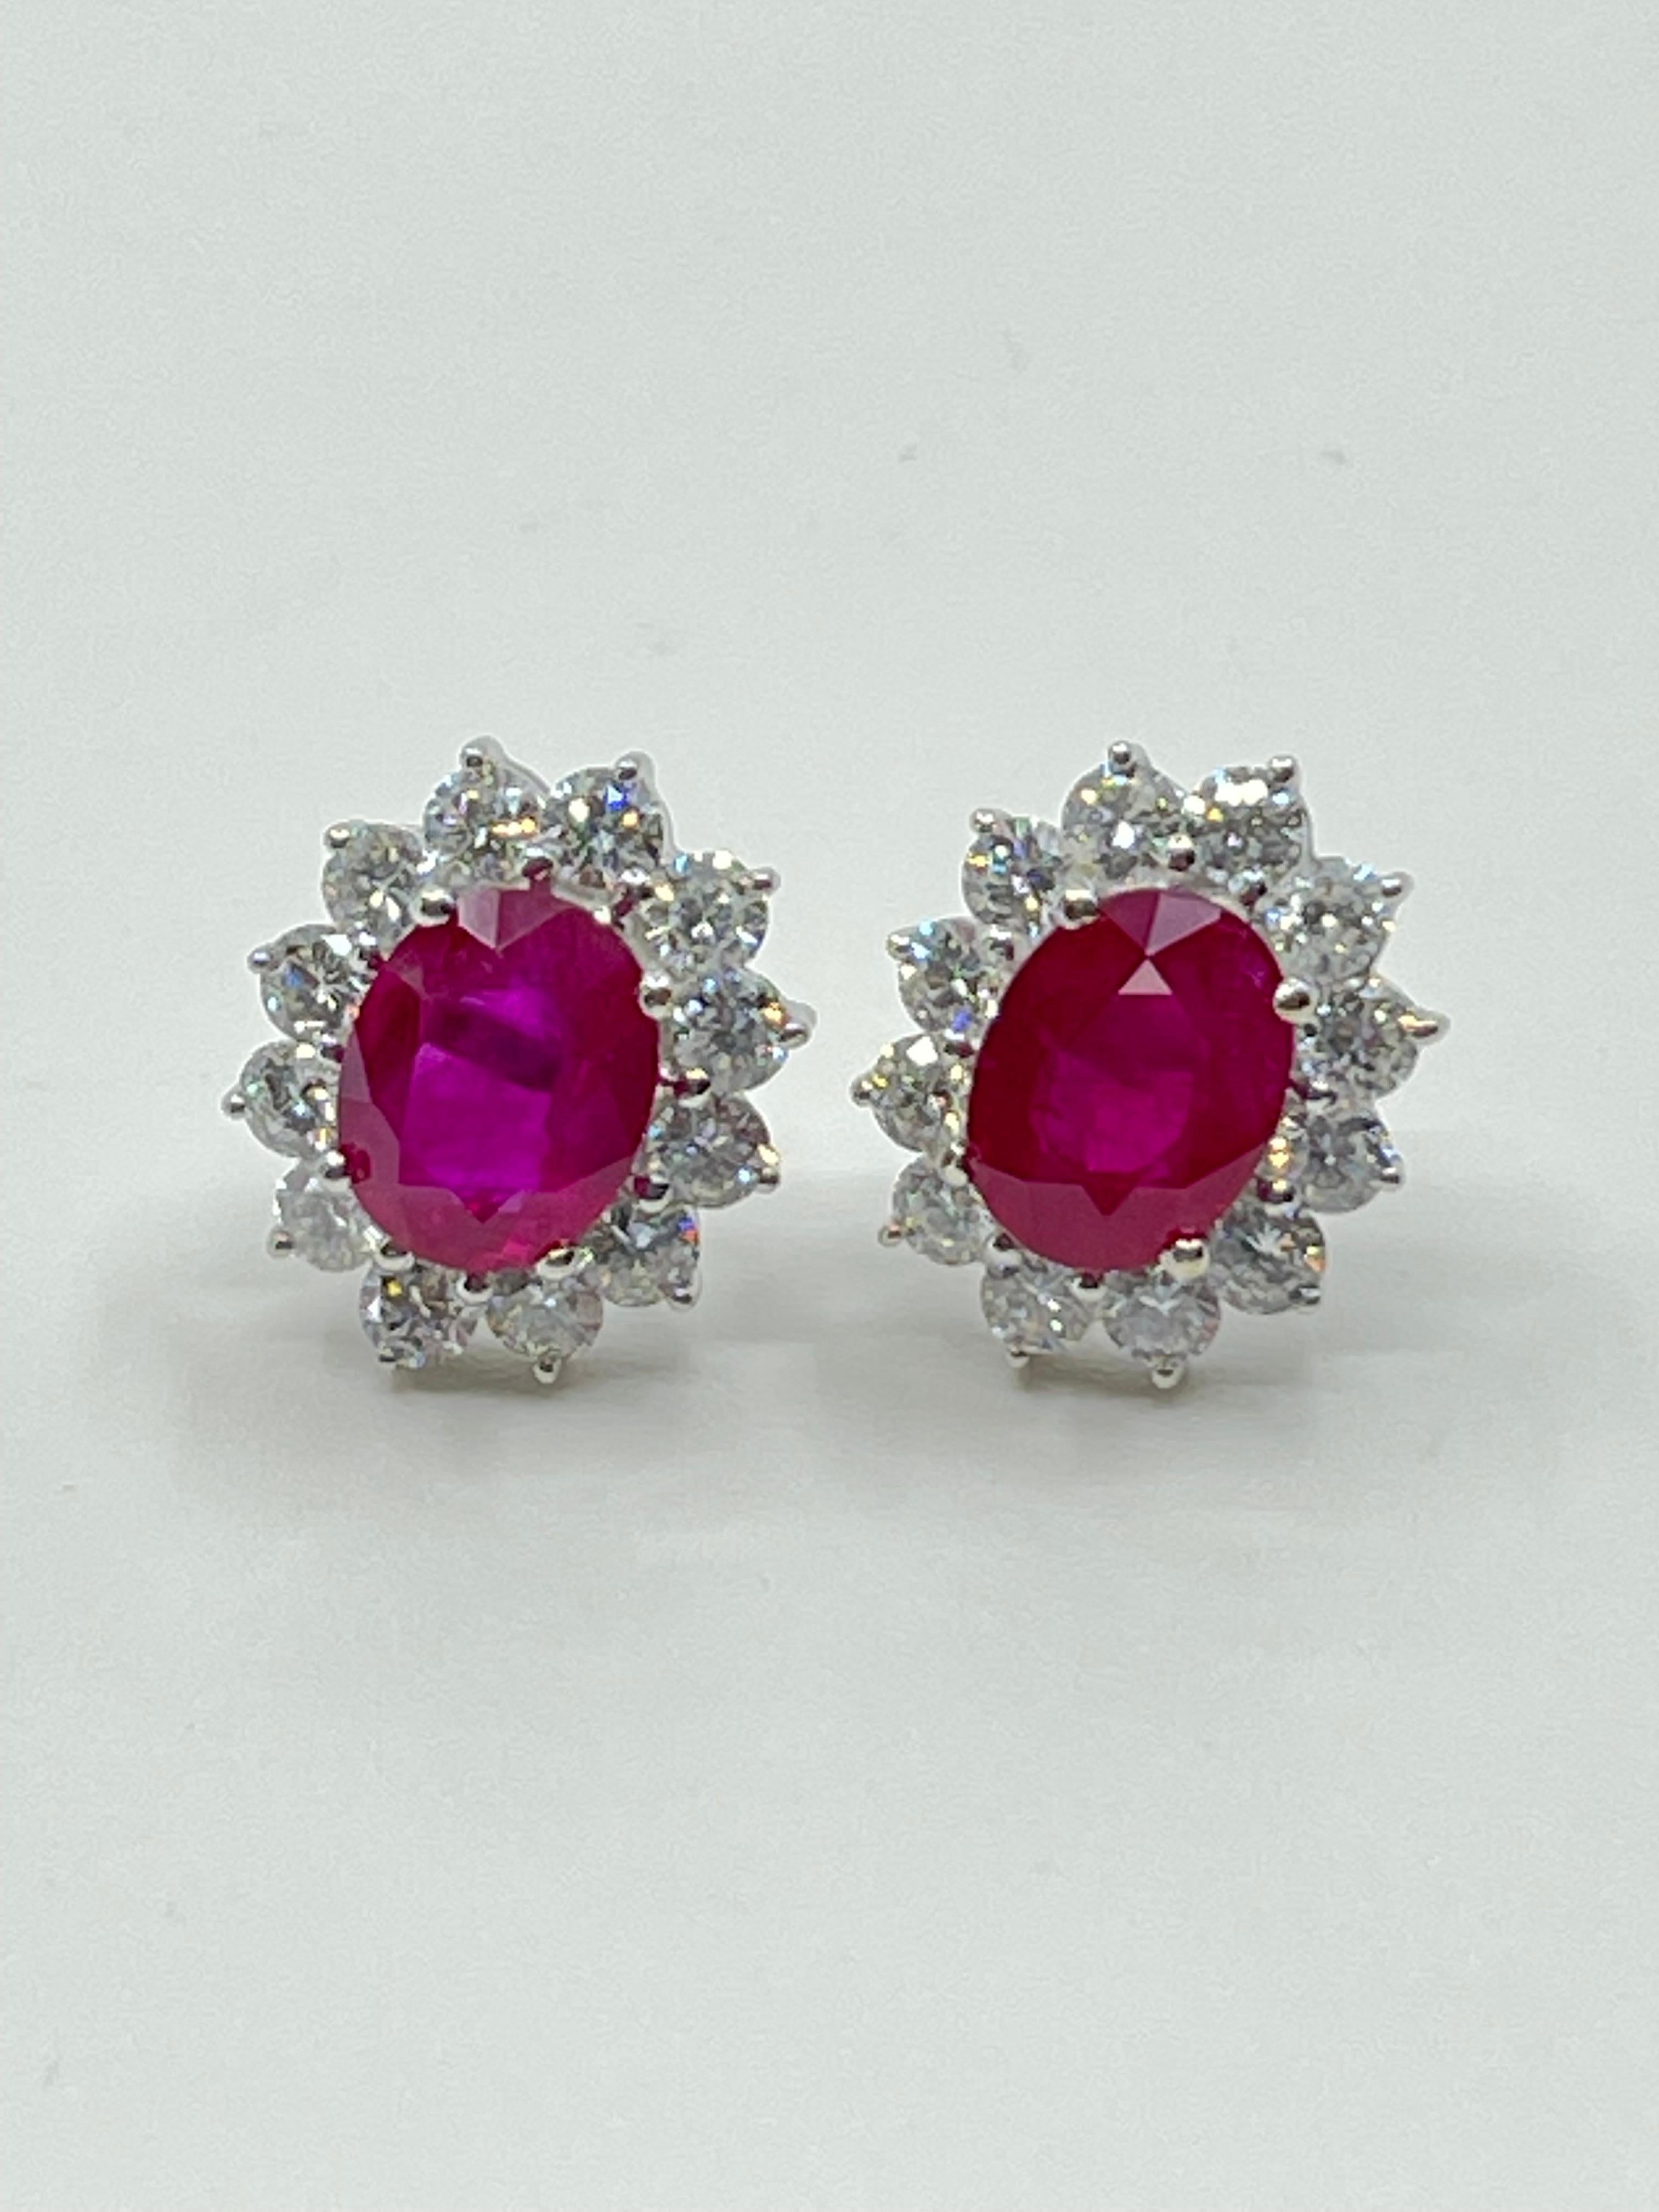 Vivid Red Ruby 4.00 CTW & Diamond Stud Earrings, Close to Pigeon Blood Red 8